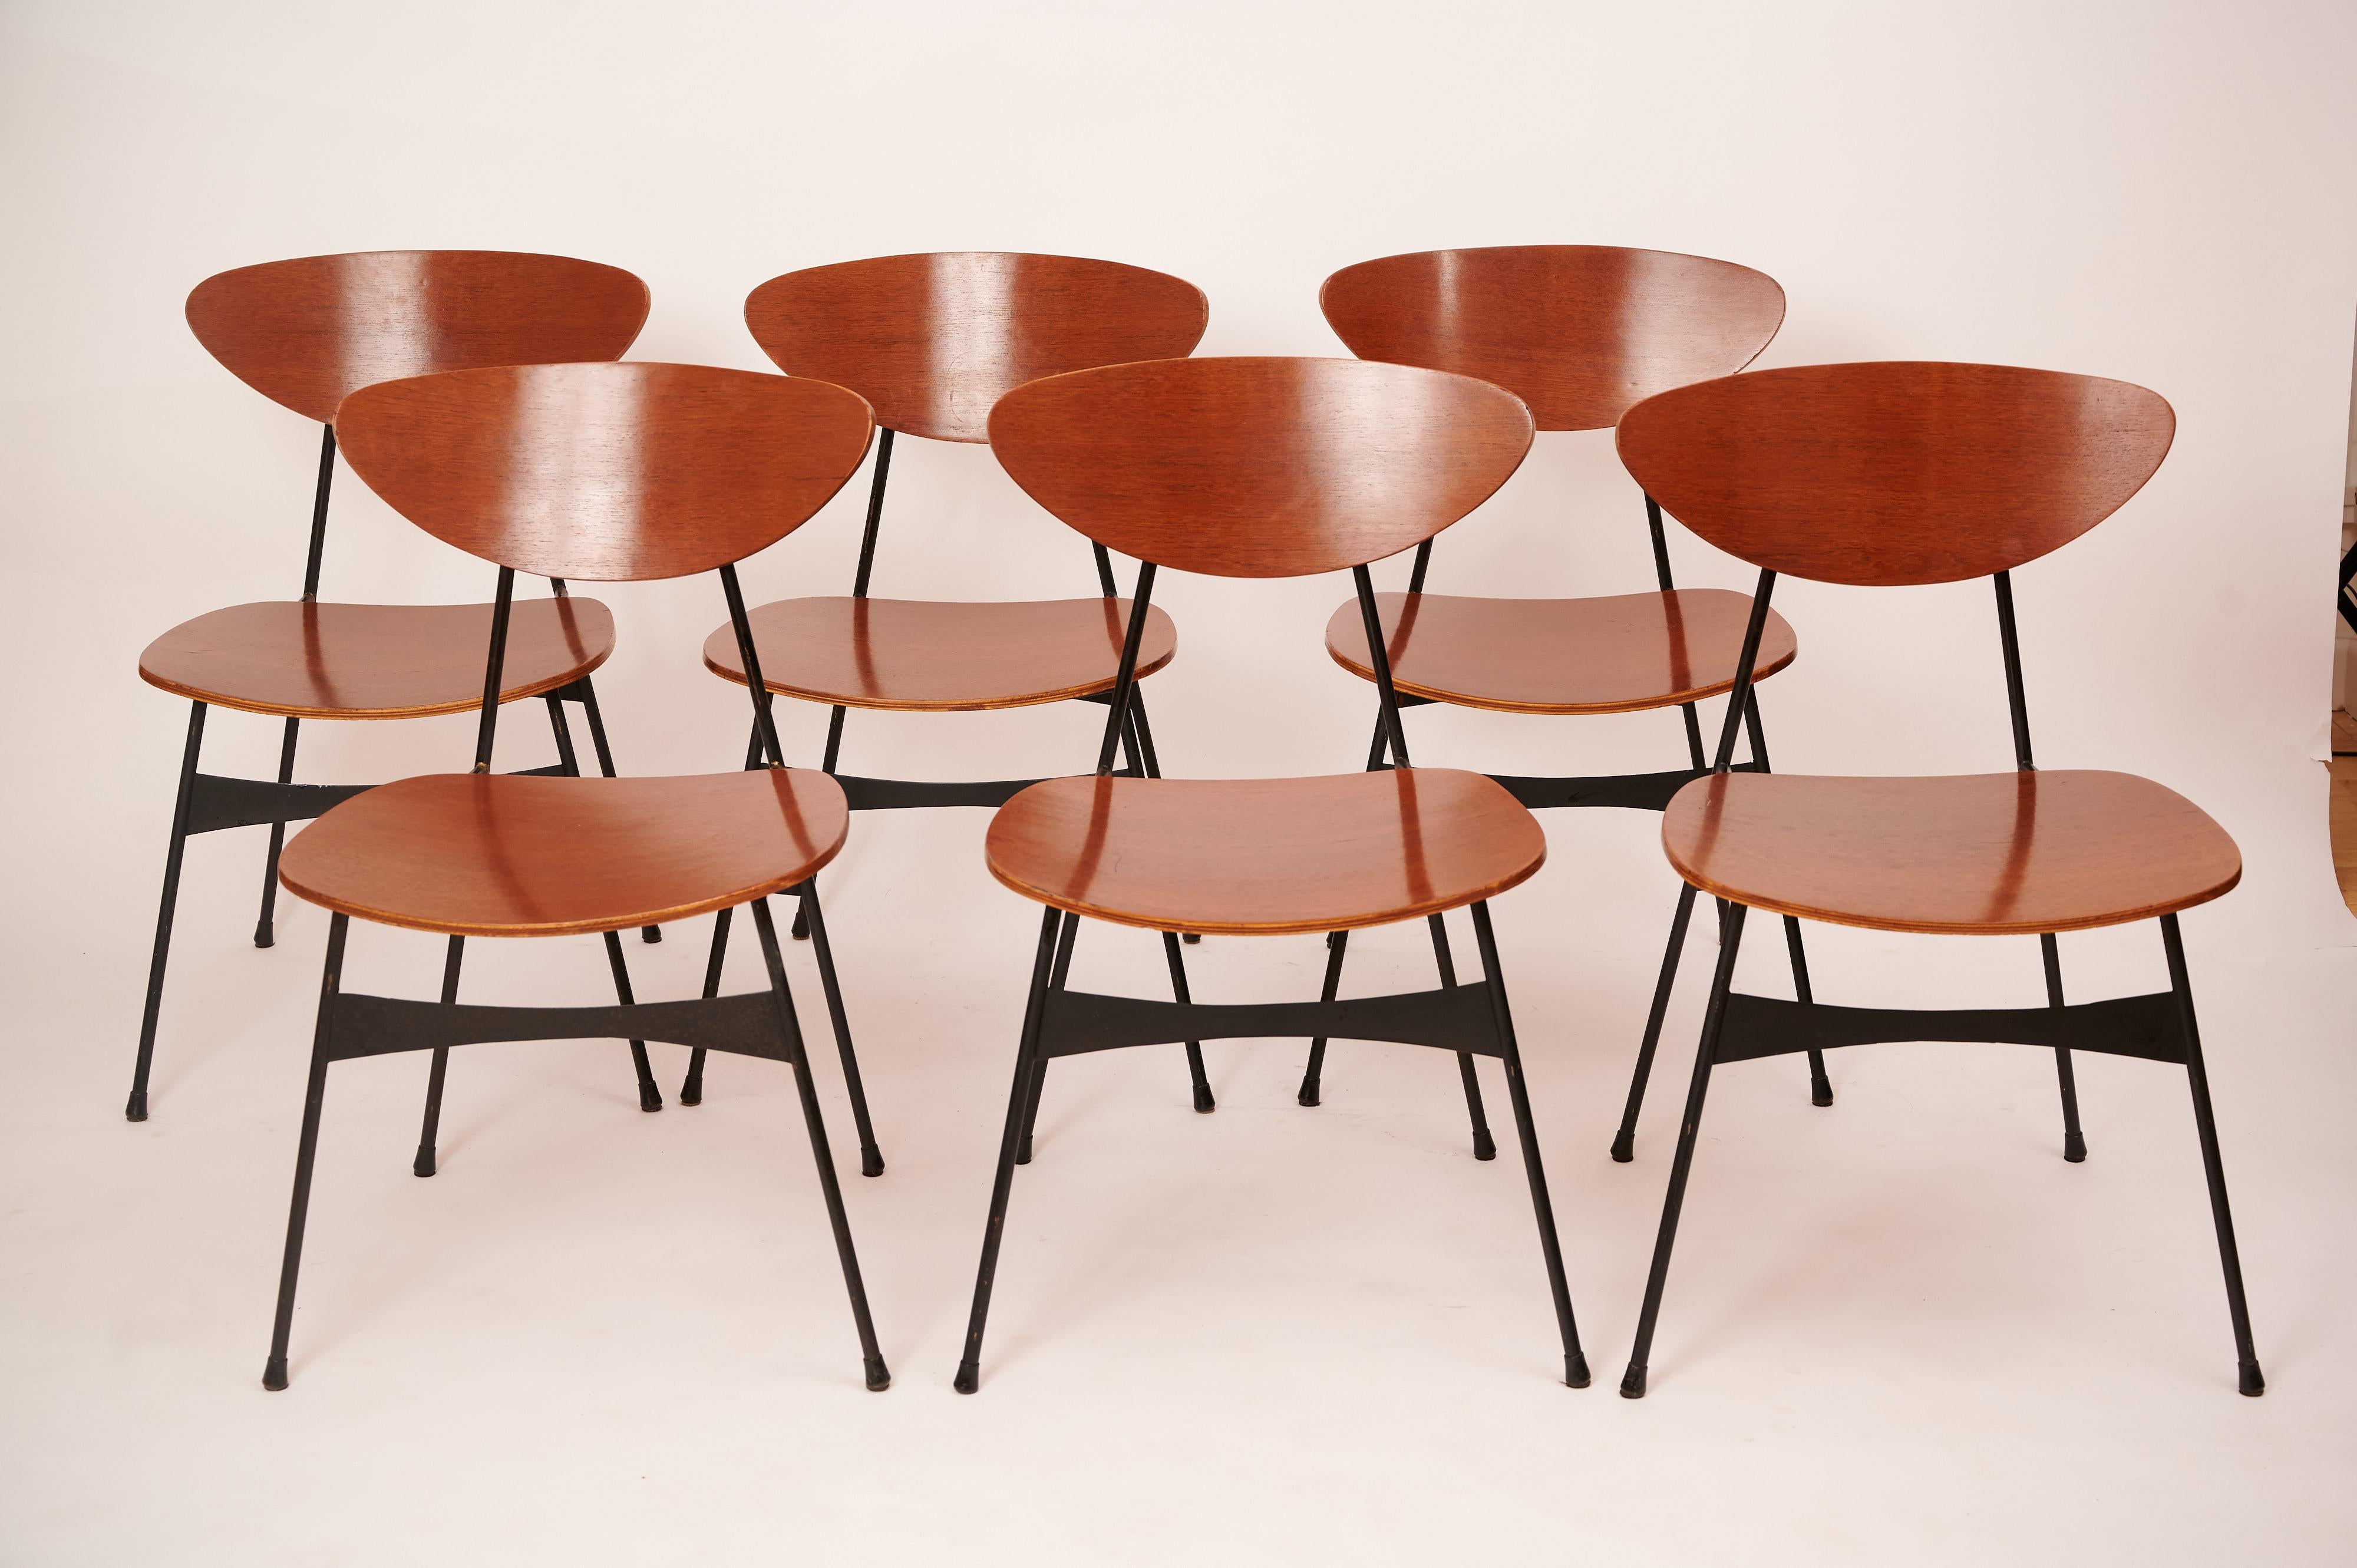 A set of six Italian plywood and black metal chairs. 

